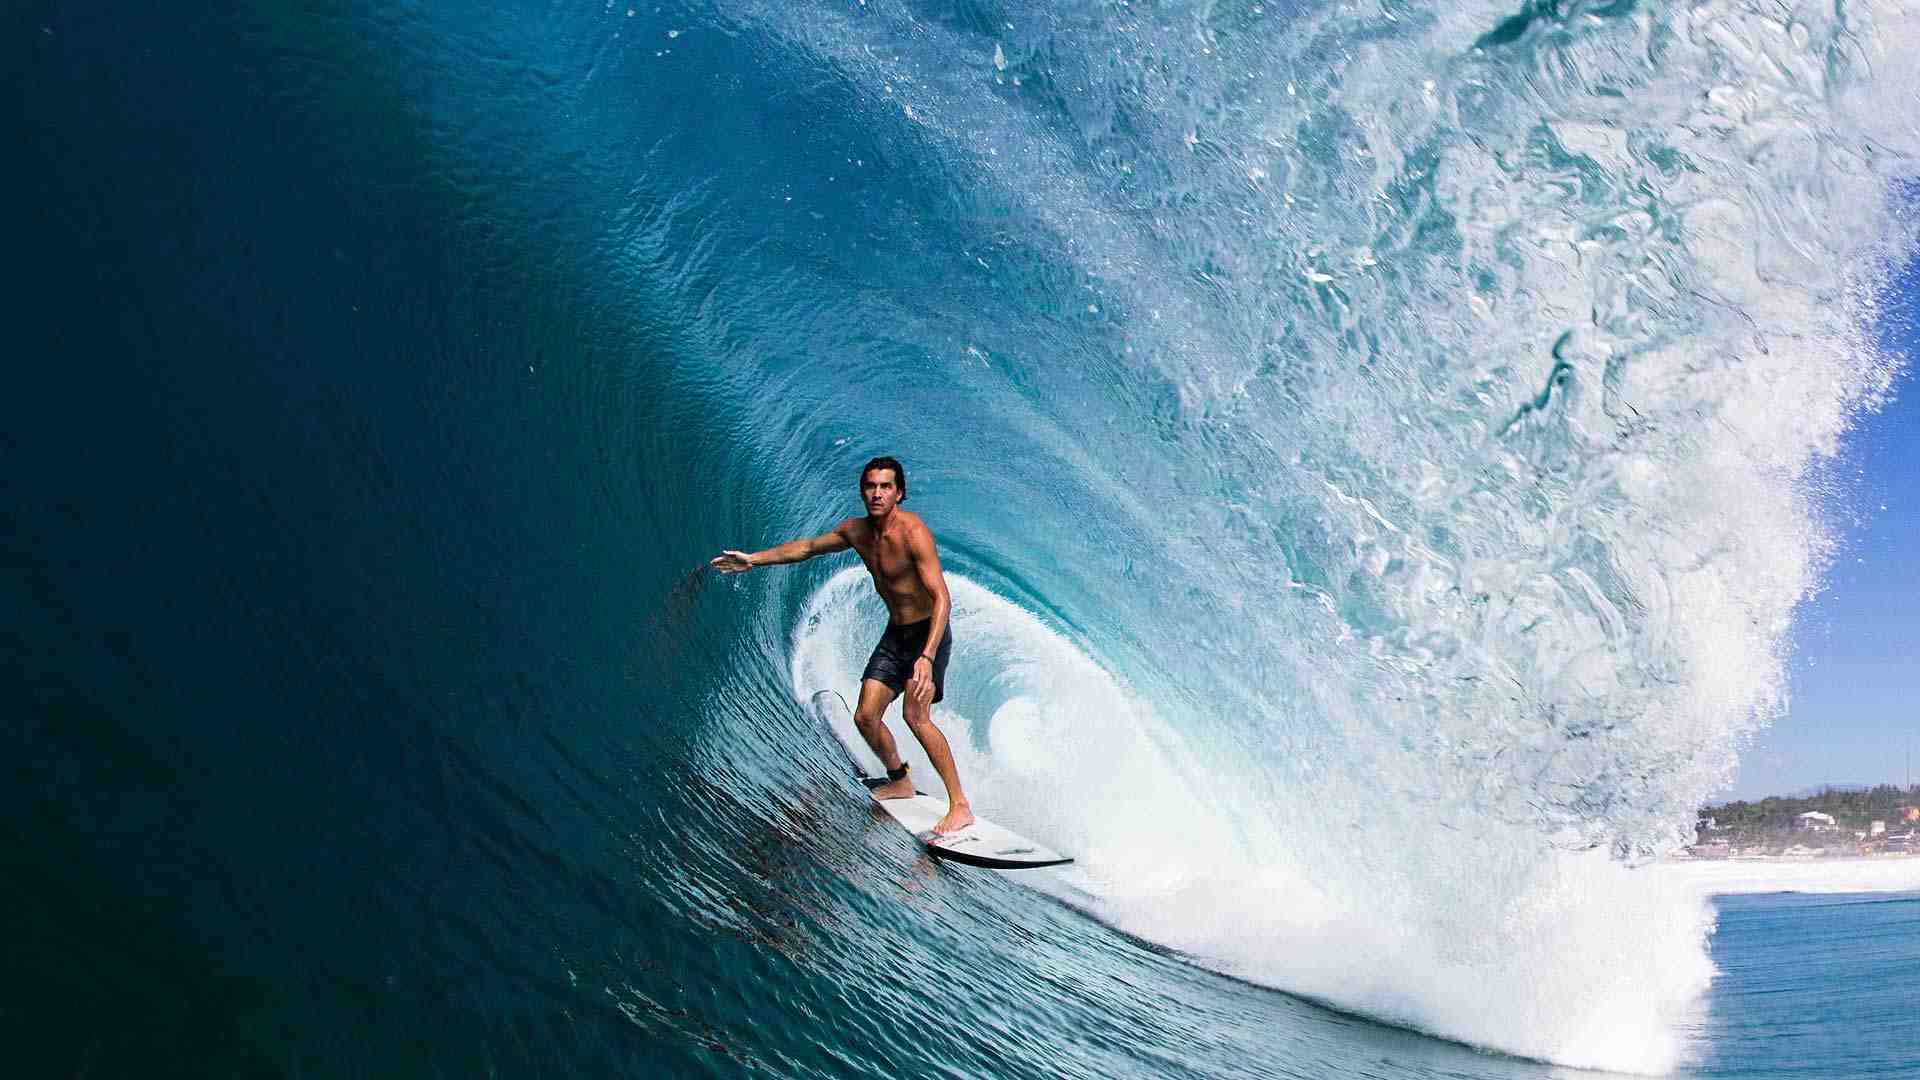 Who has ridden the biggest wave in the world?